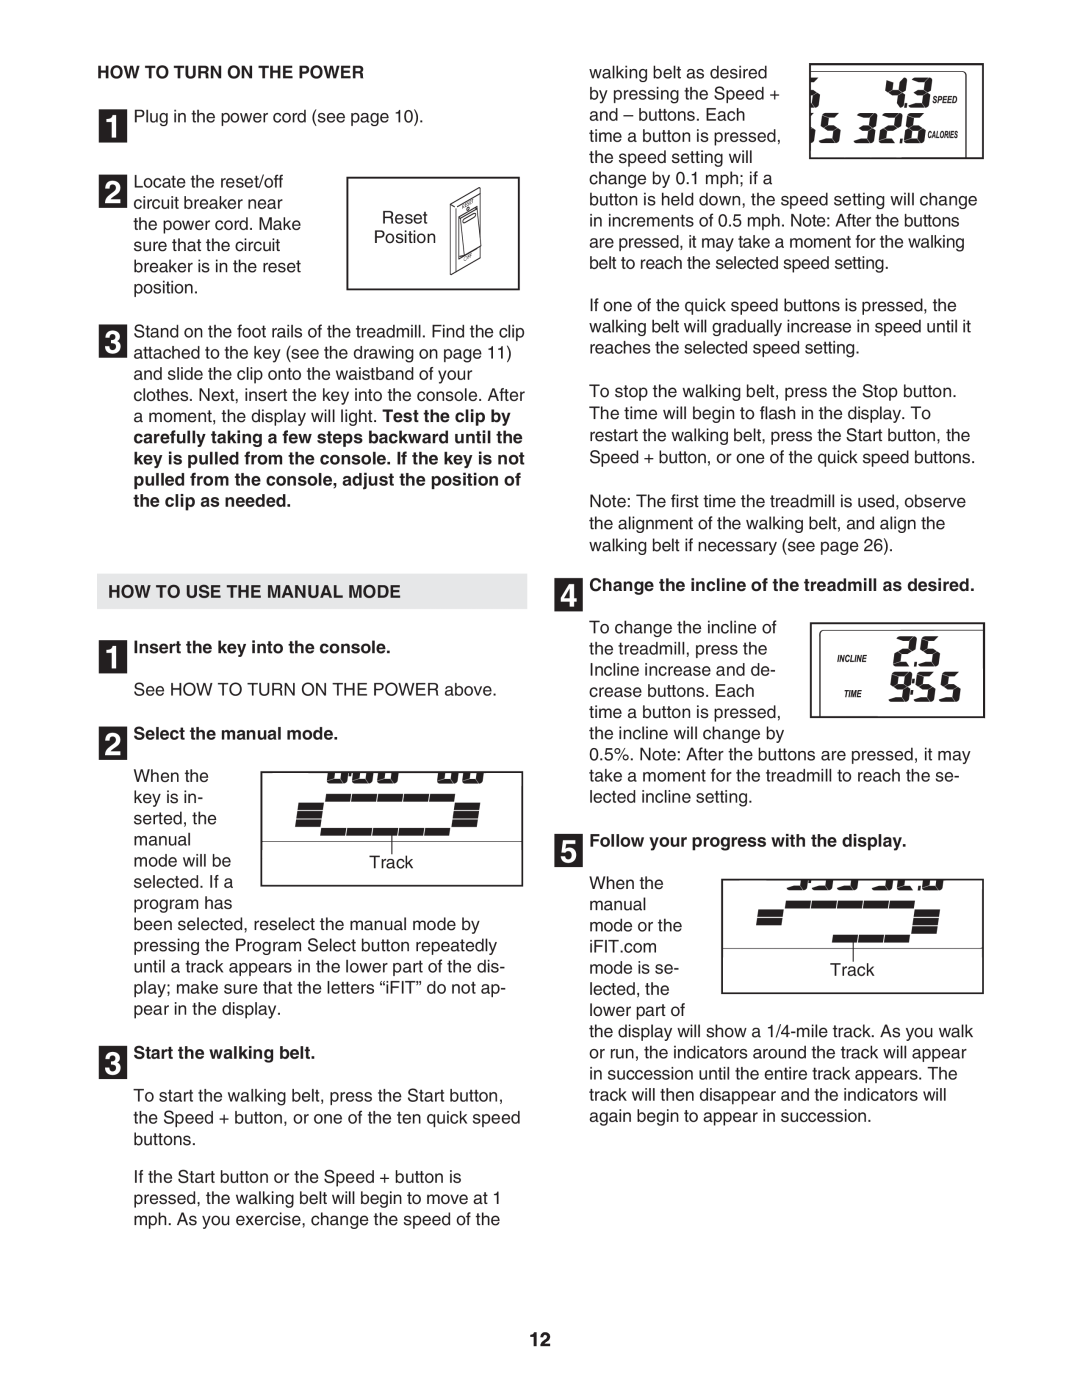 ProForm 30514.0 user manual How To Turn On The Power, HOW TO USE THE MANUAL MODE 1 Insert the key into the console 